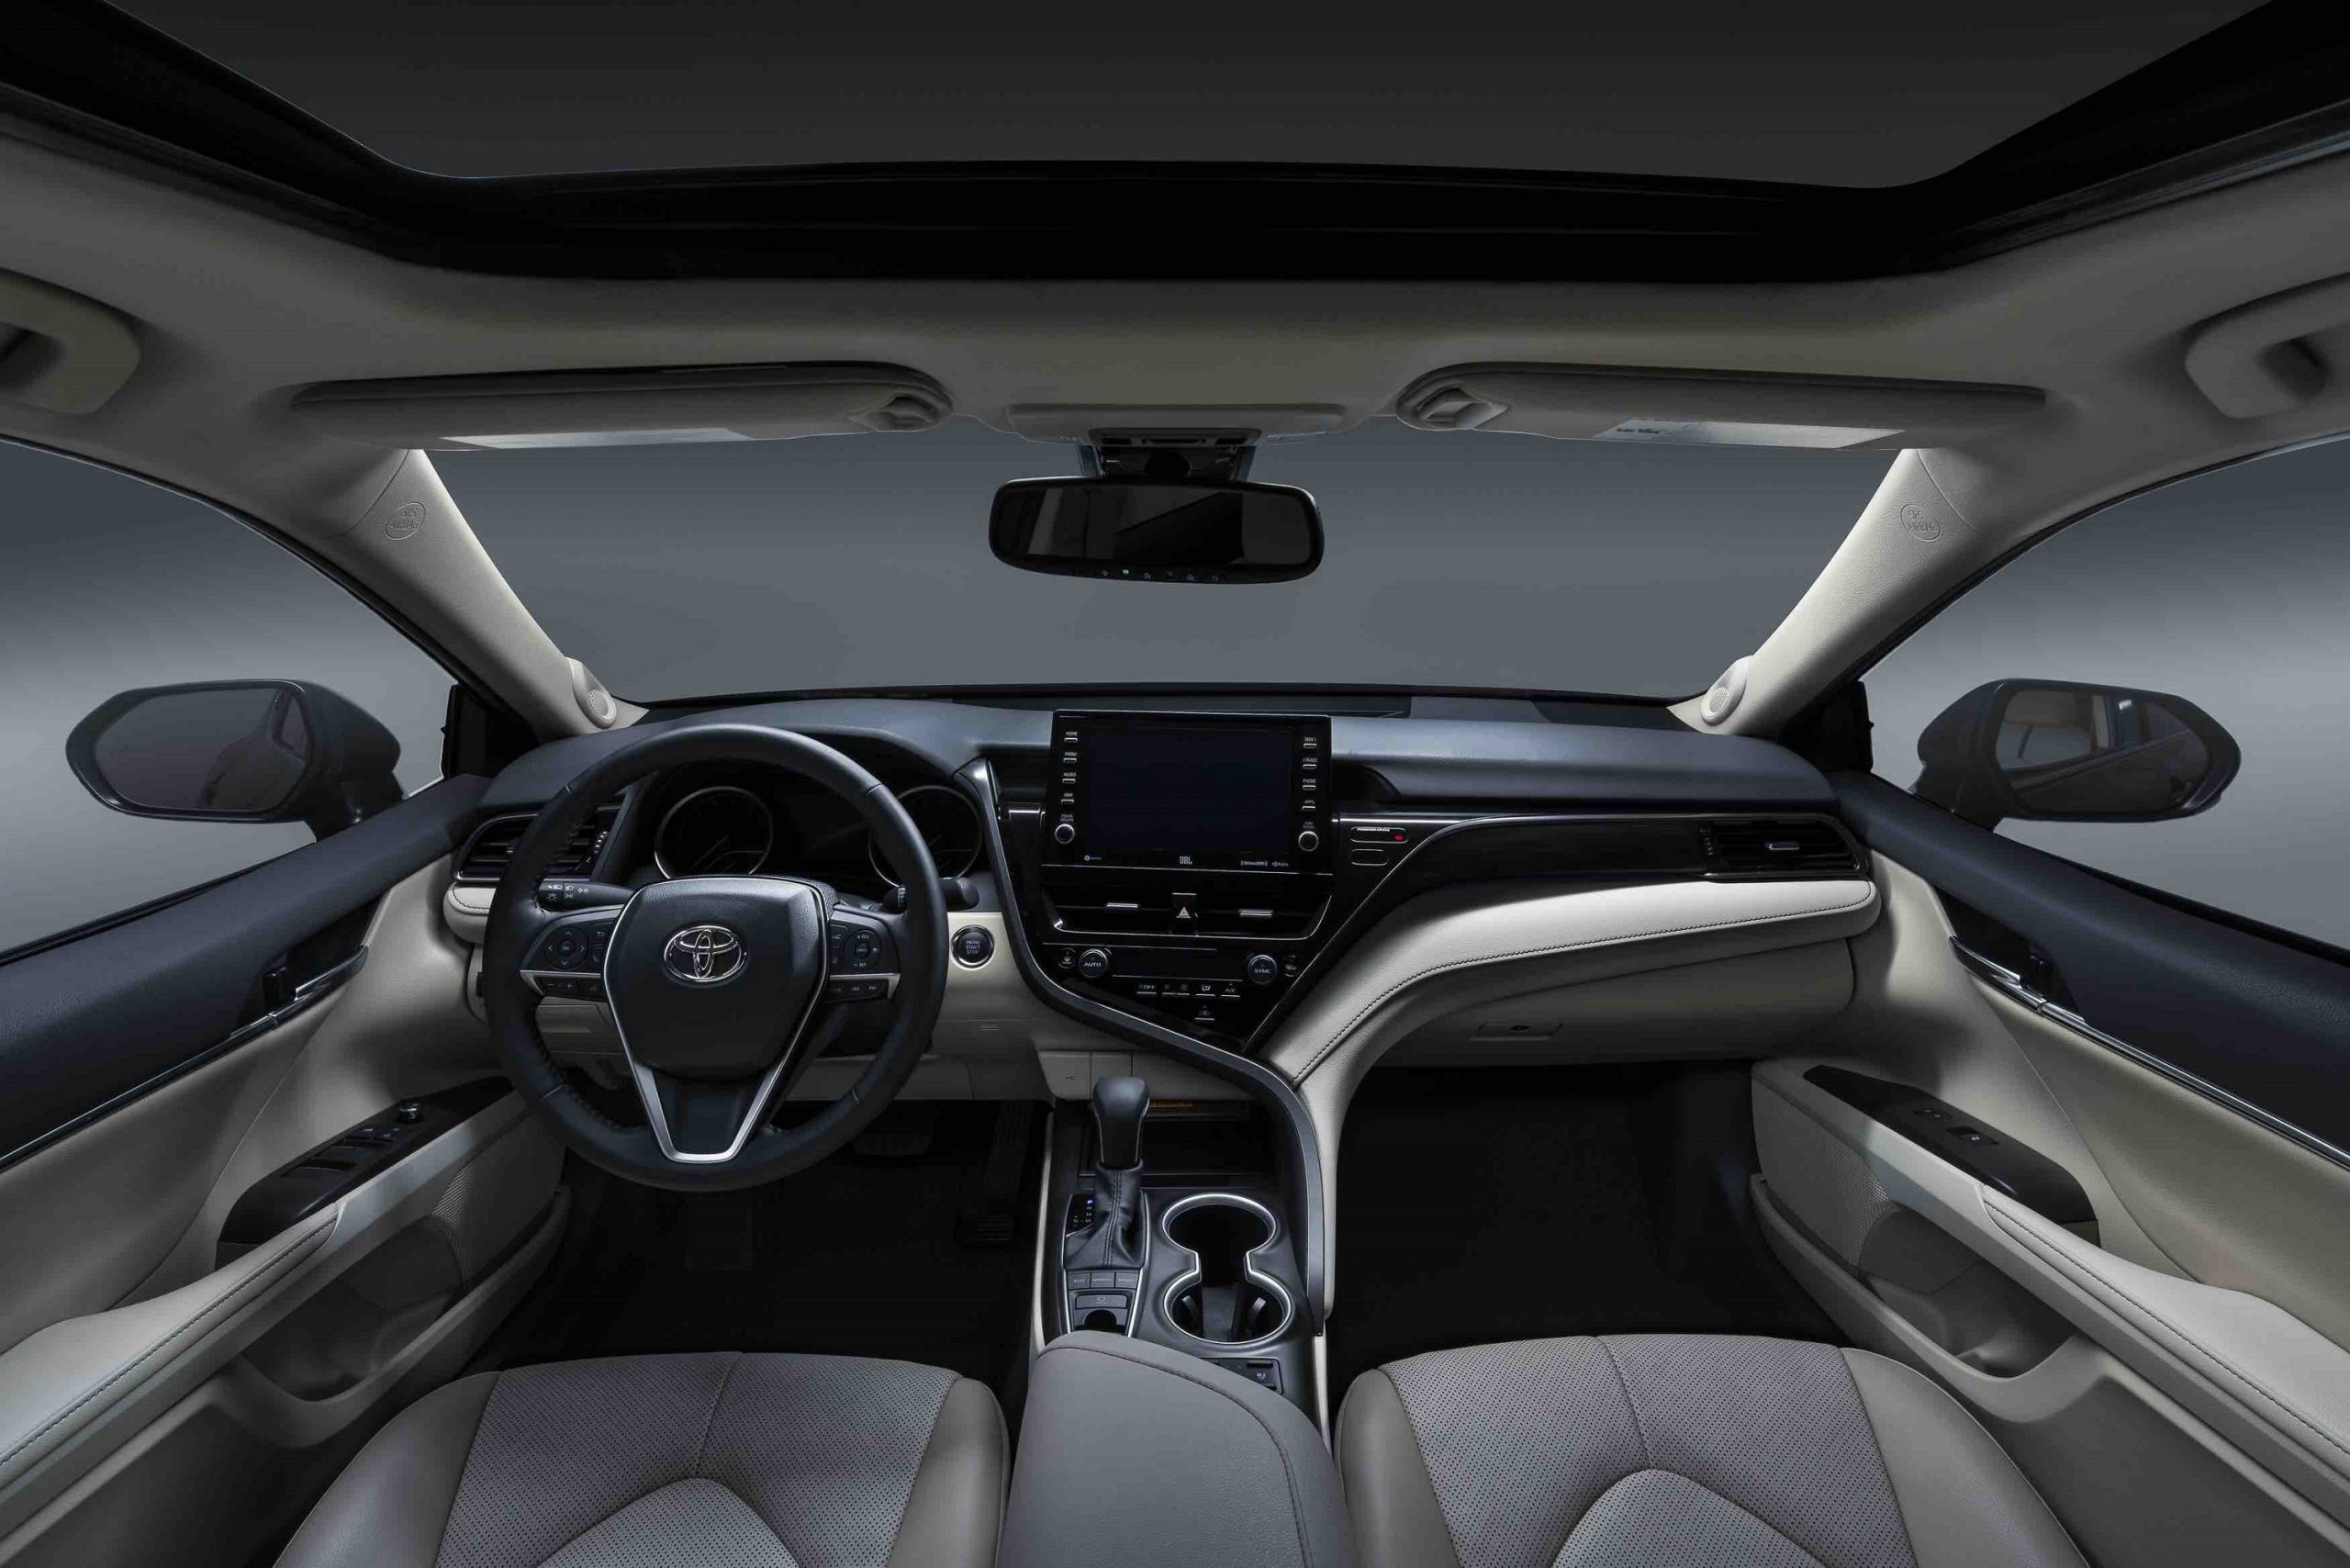 The 2022 Toyota Camry's interior with beige leather